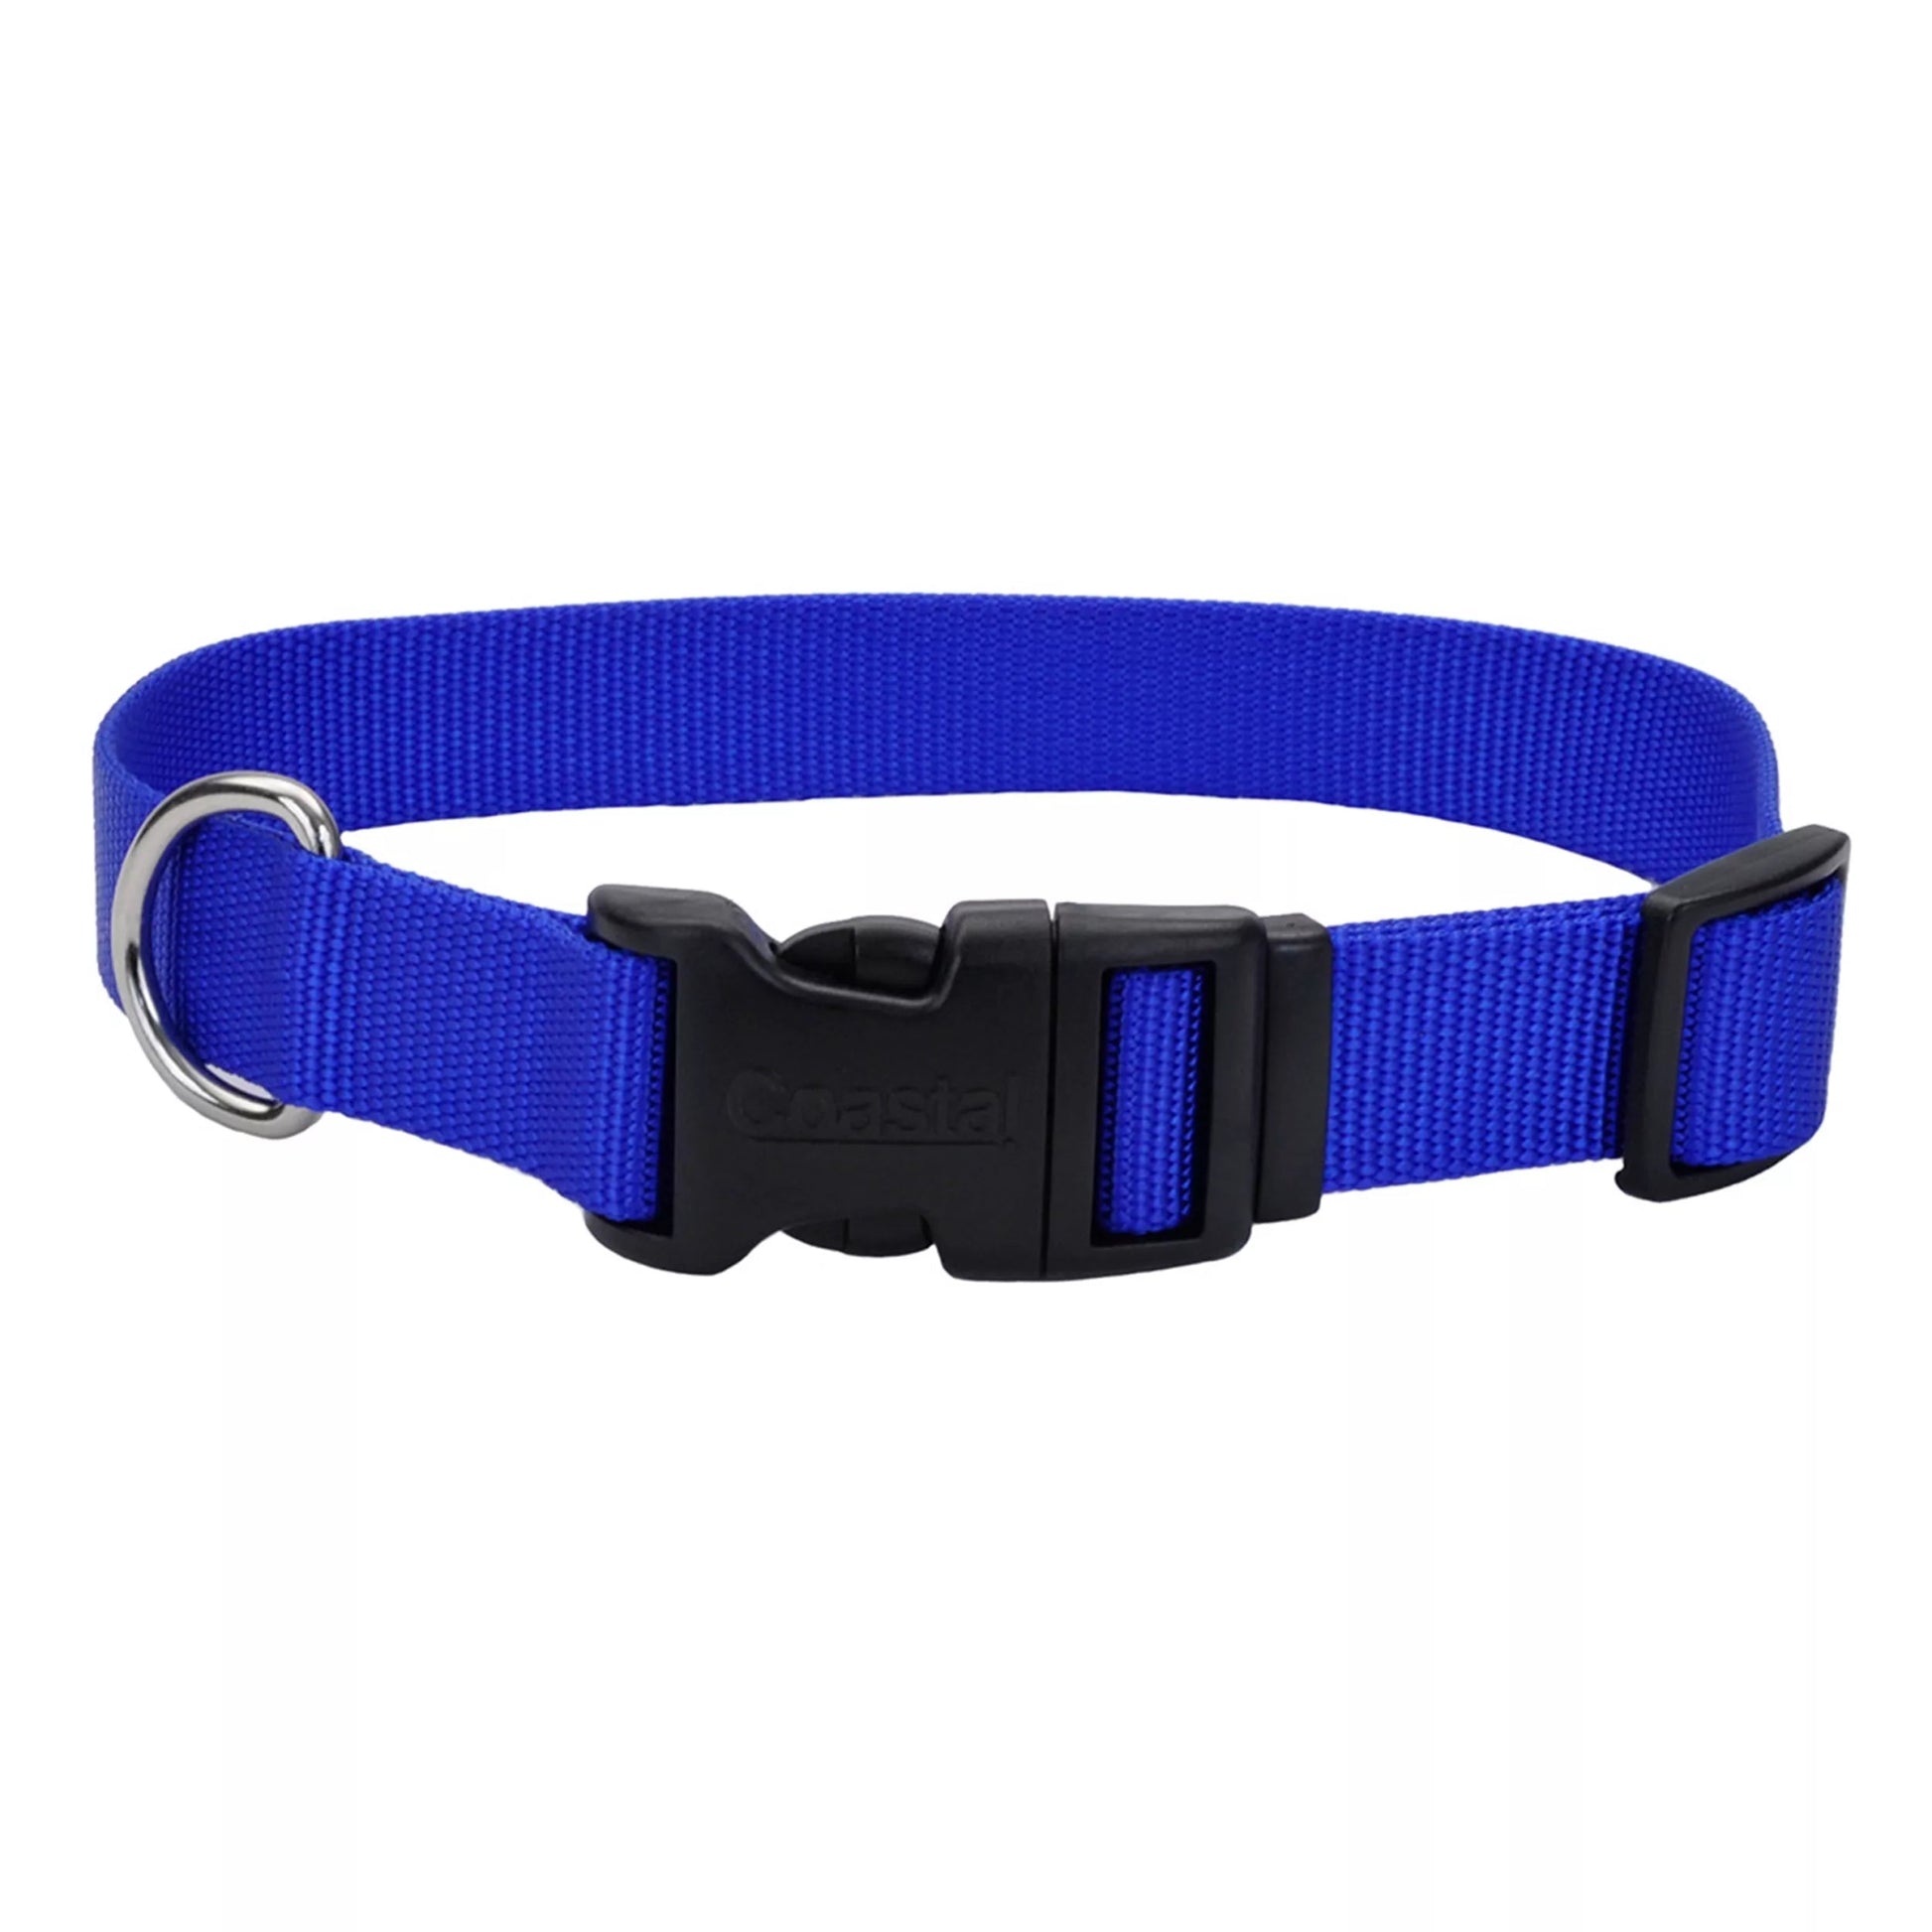 Adjustable Nylon Collar - Various Colors - Wiggles & Whiskers Pet SuppliesCoastal Pet Products